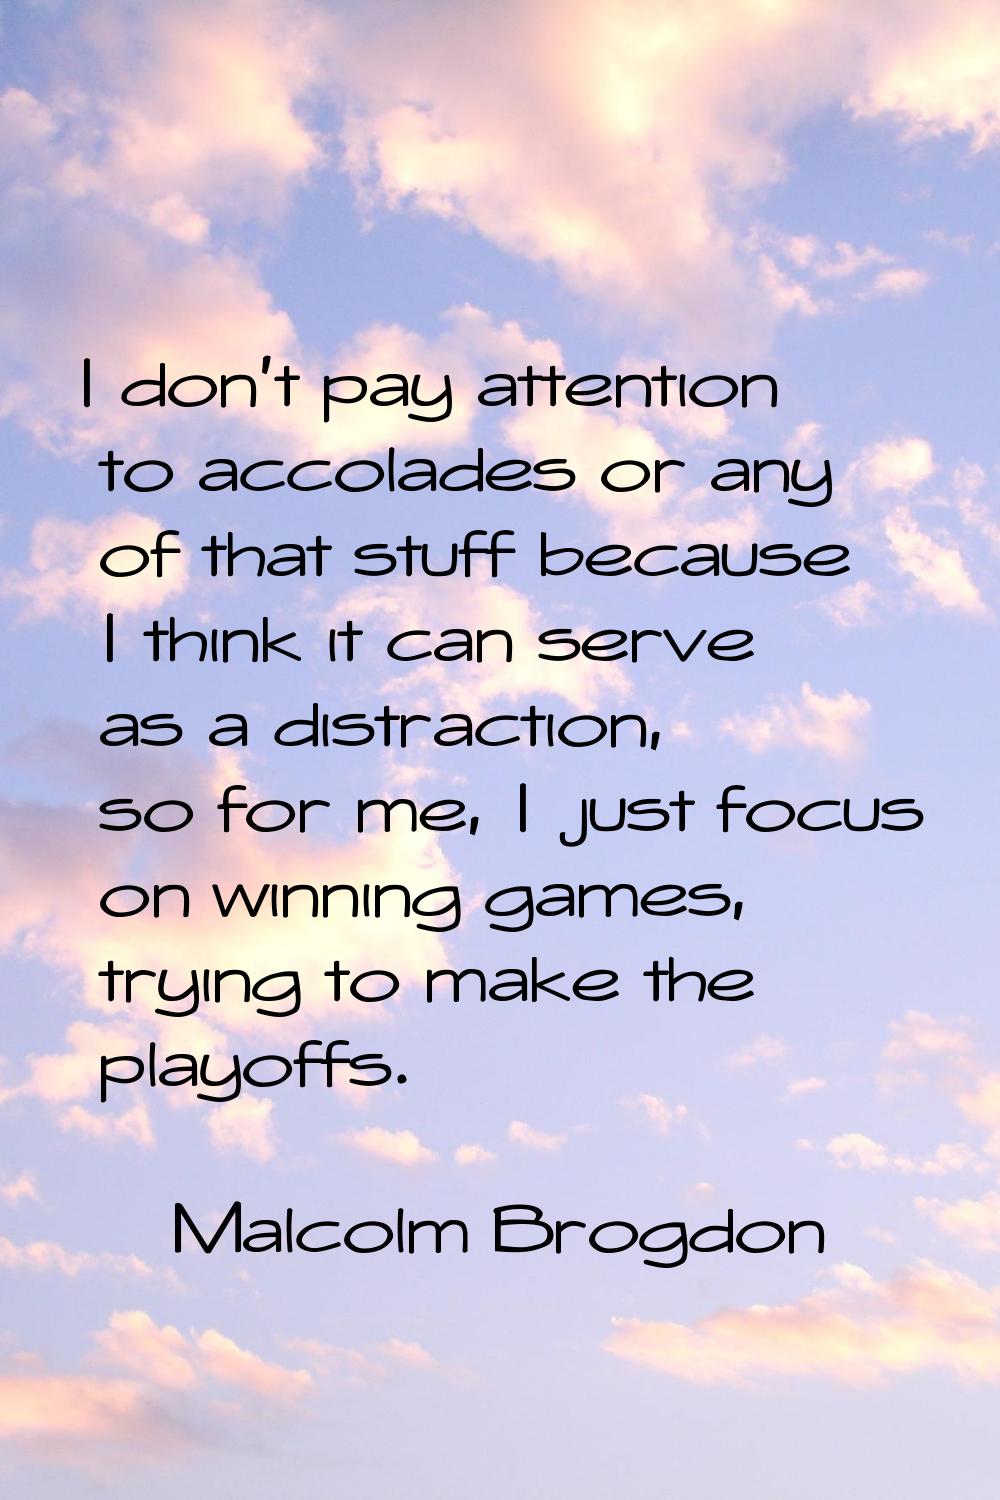 I don't pay attention to accolades or any of that stuff because I think it can serve as a distracti